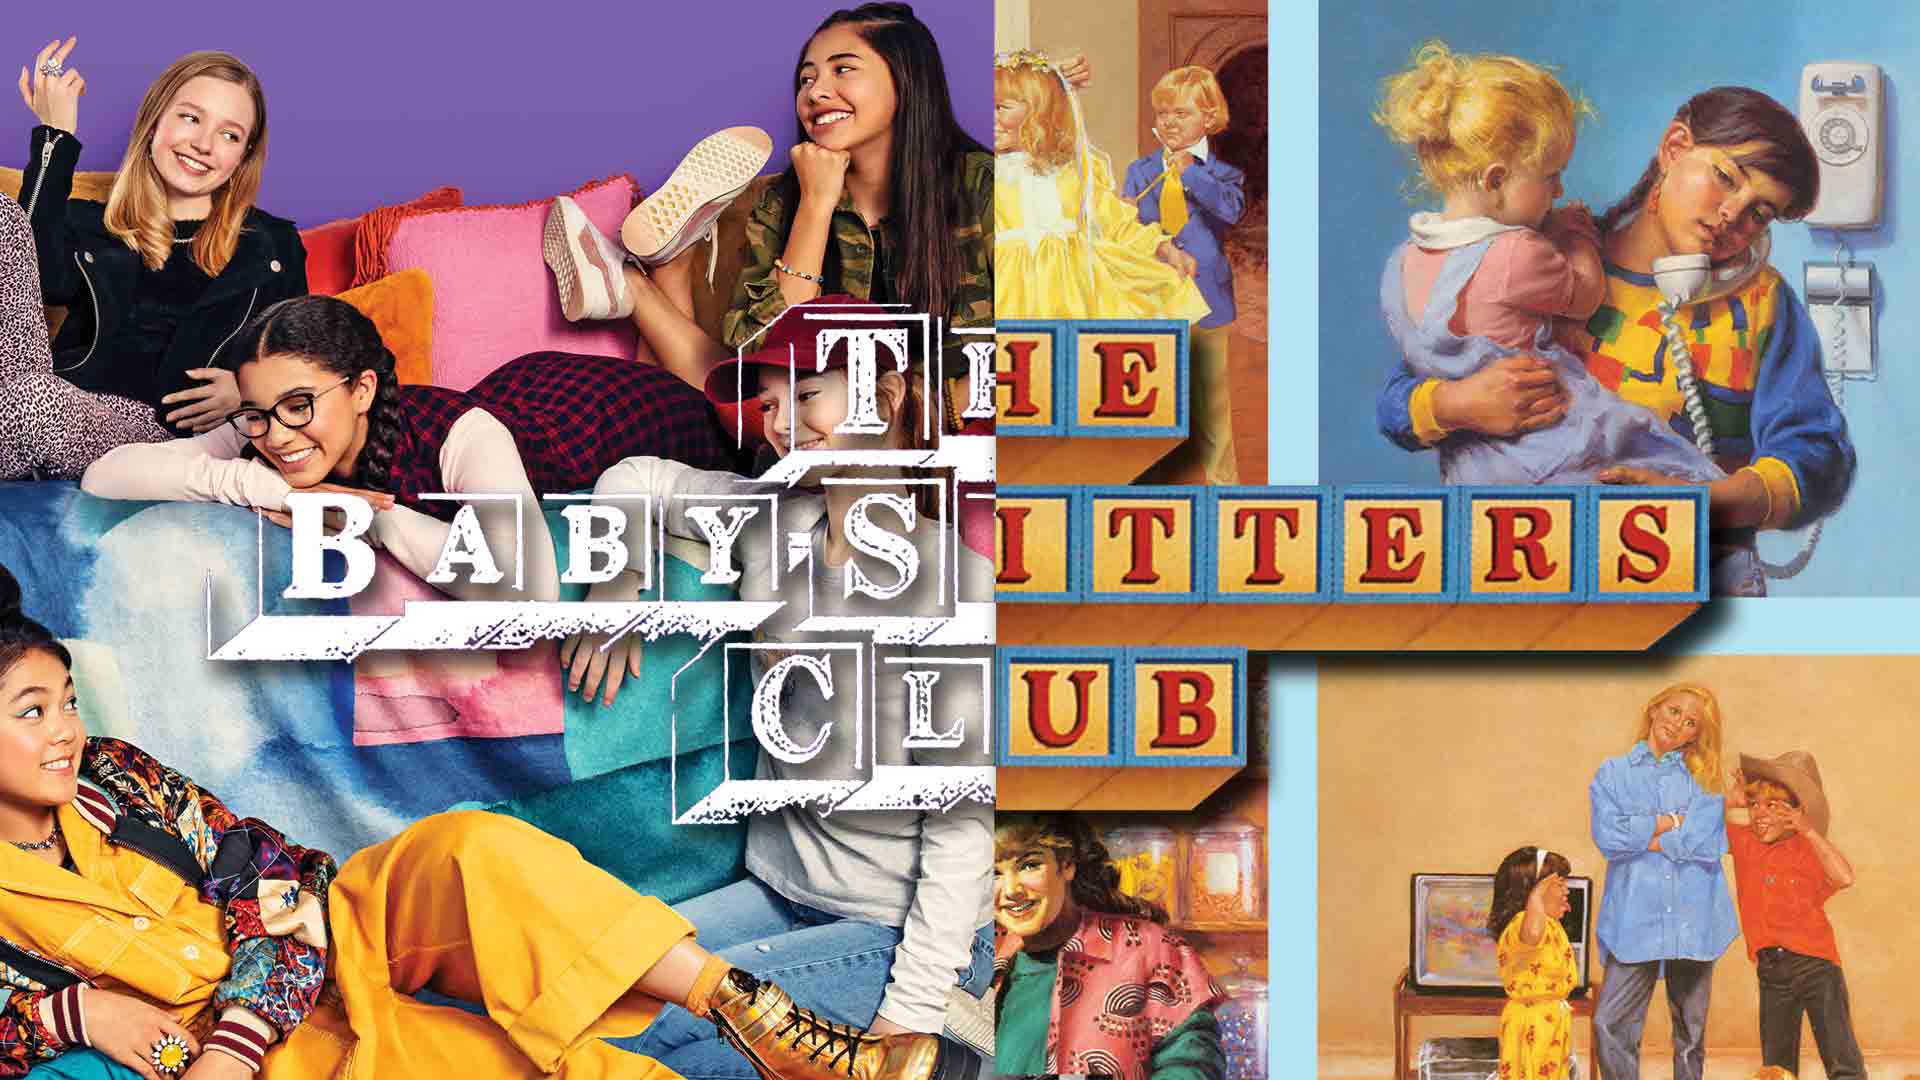 The Paris Review - Could The Baby-Sitters Club Have Been More Gay? - The  Paris Review